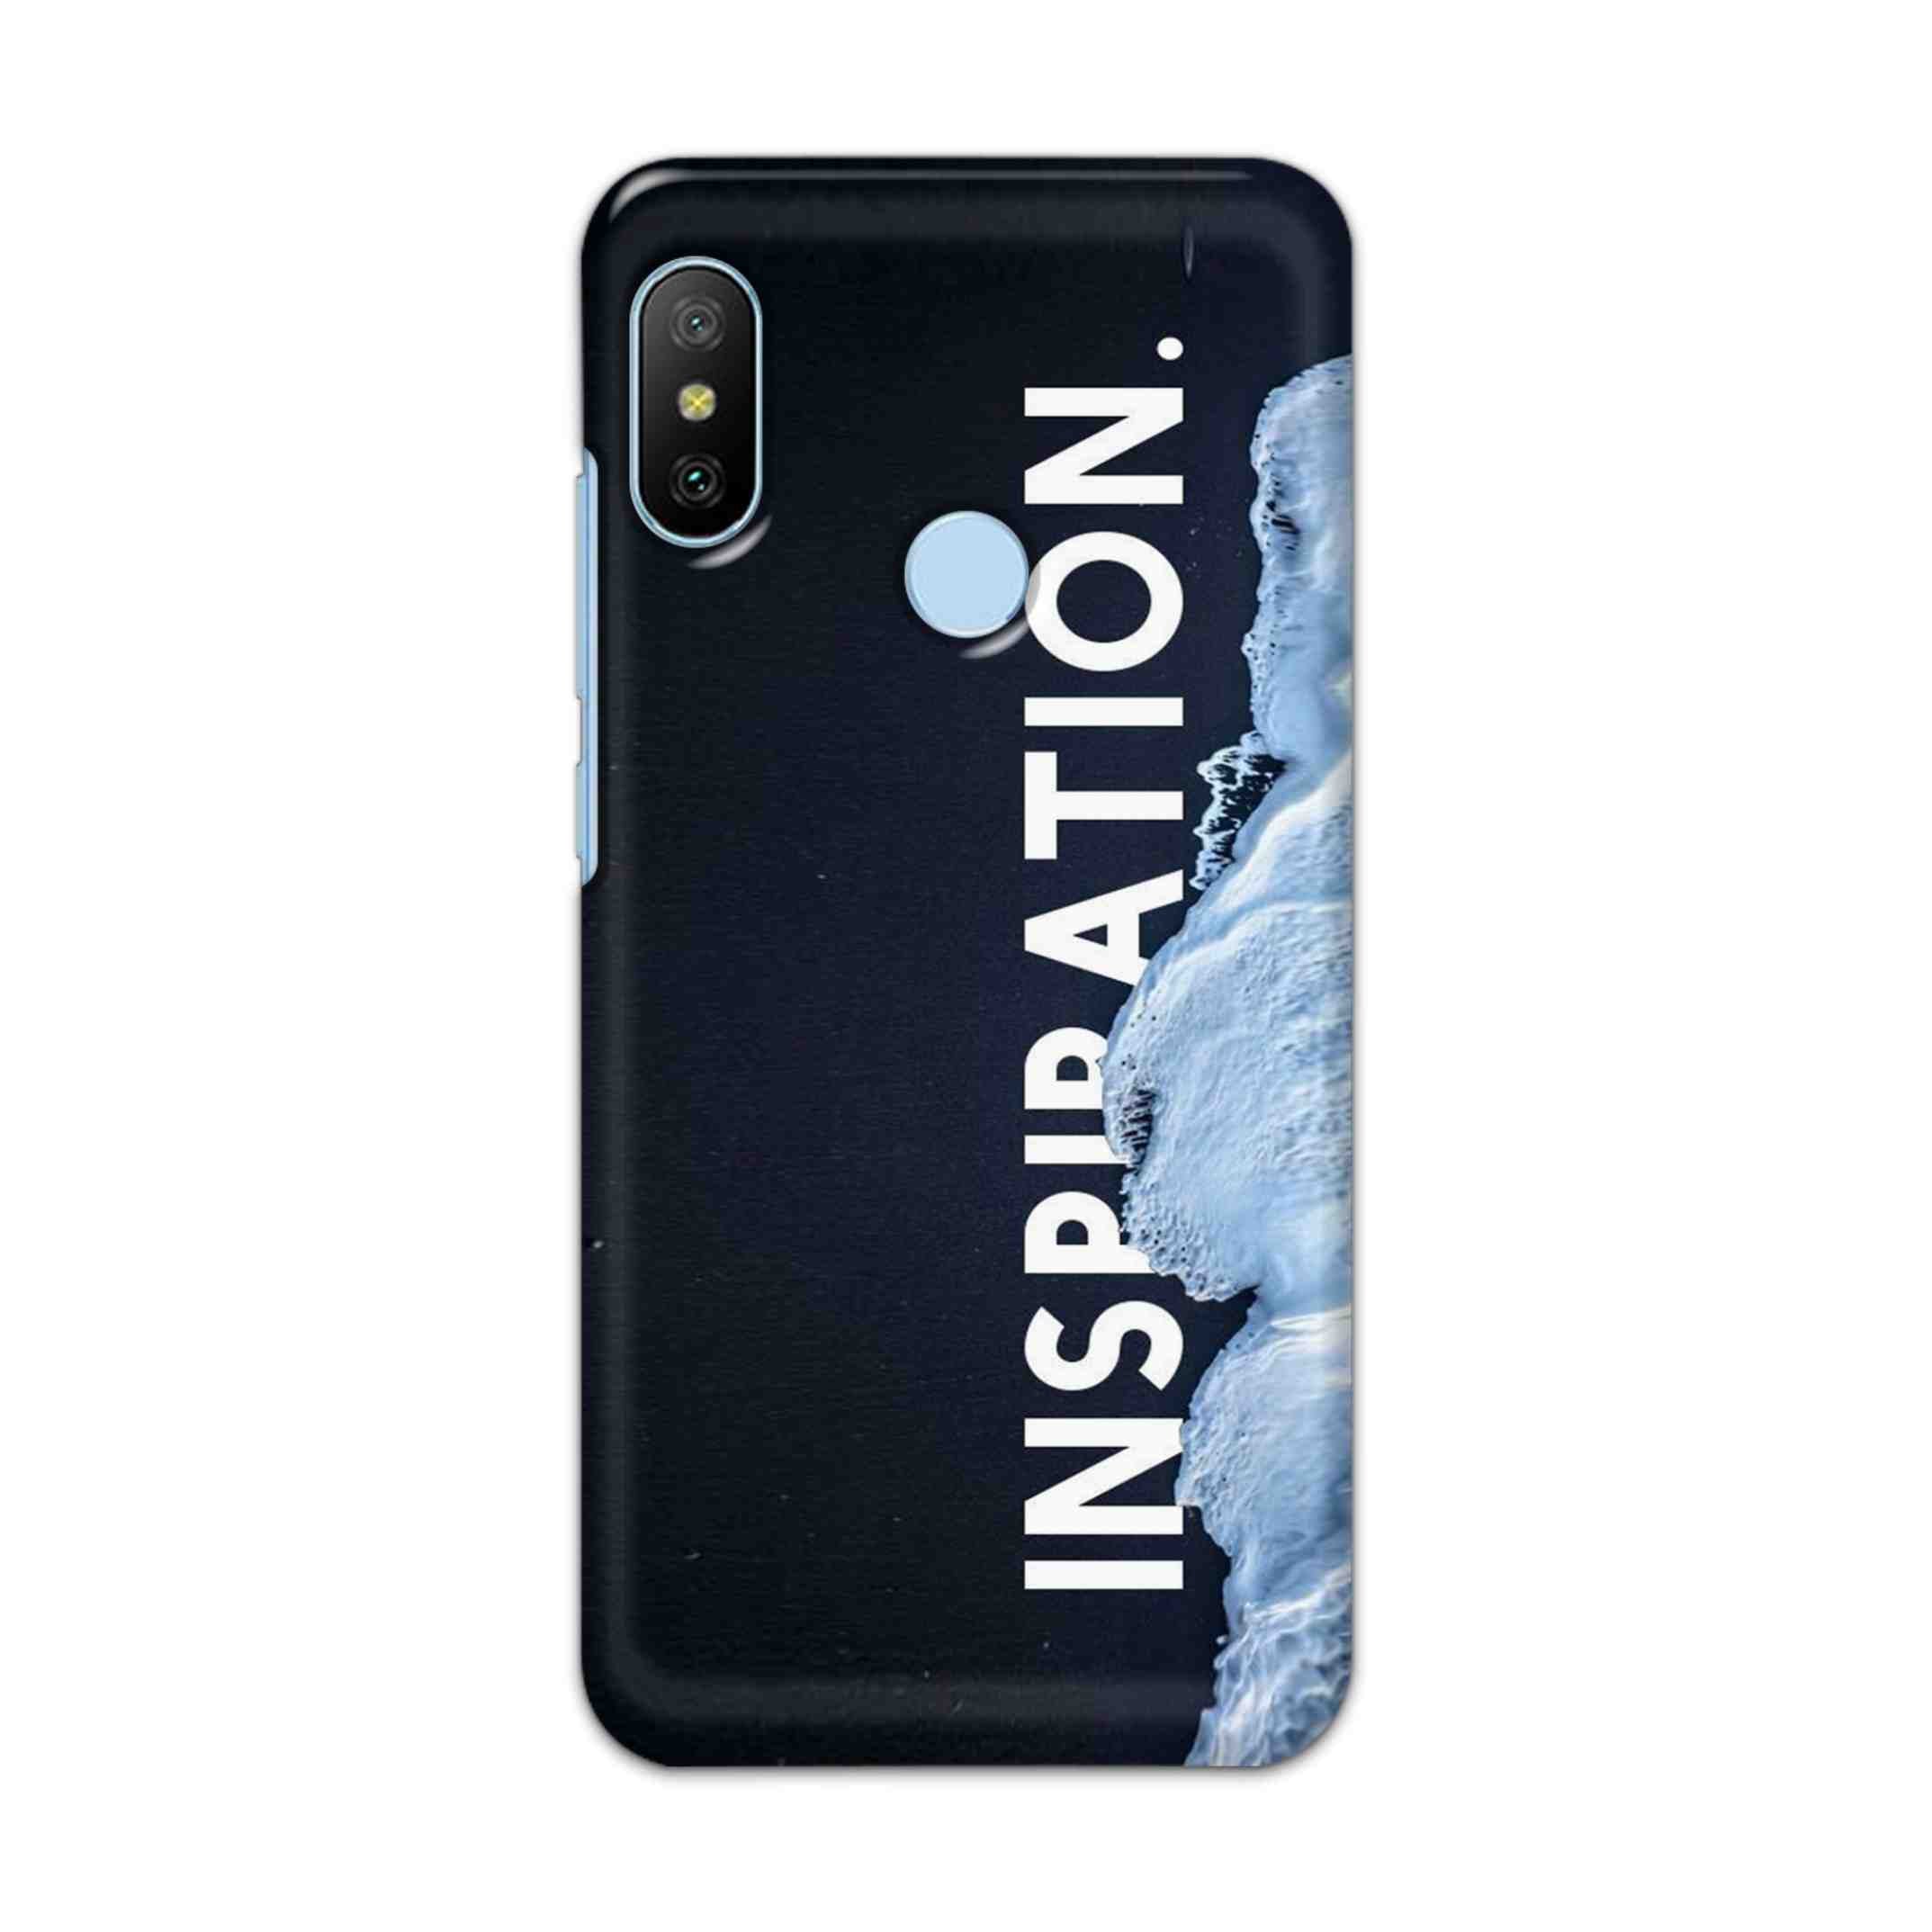 Buy Inspiration Hard Back Mobile Phone Case/Cover For Xiaomi Redmi 6 Pro Online